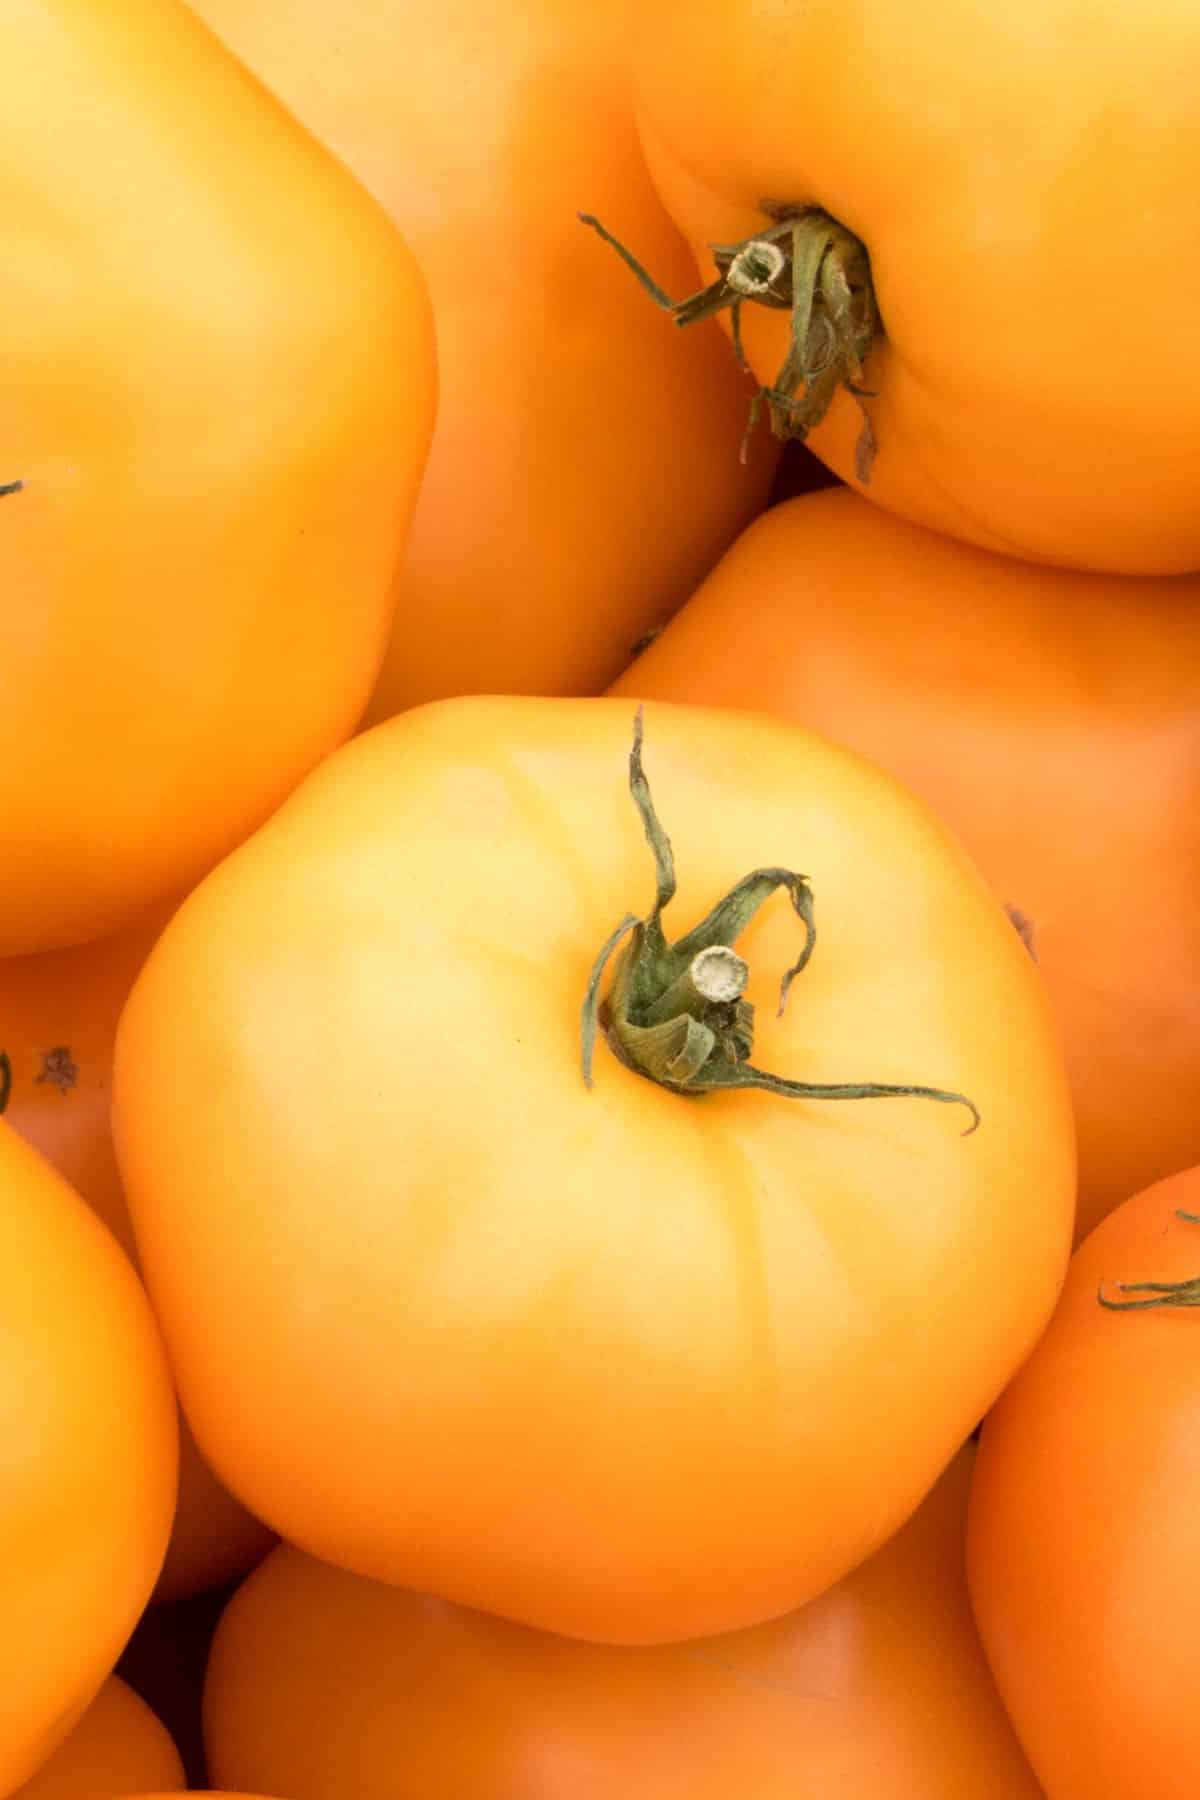 a close-up of orange tomatoes.